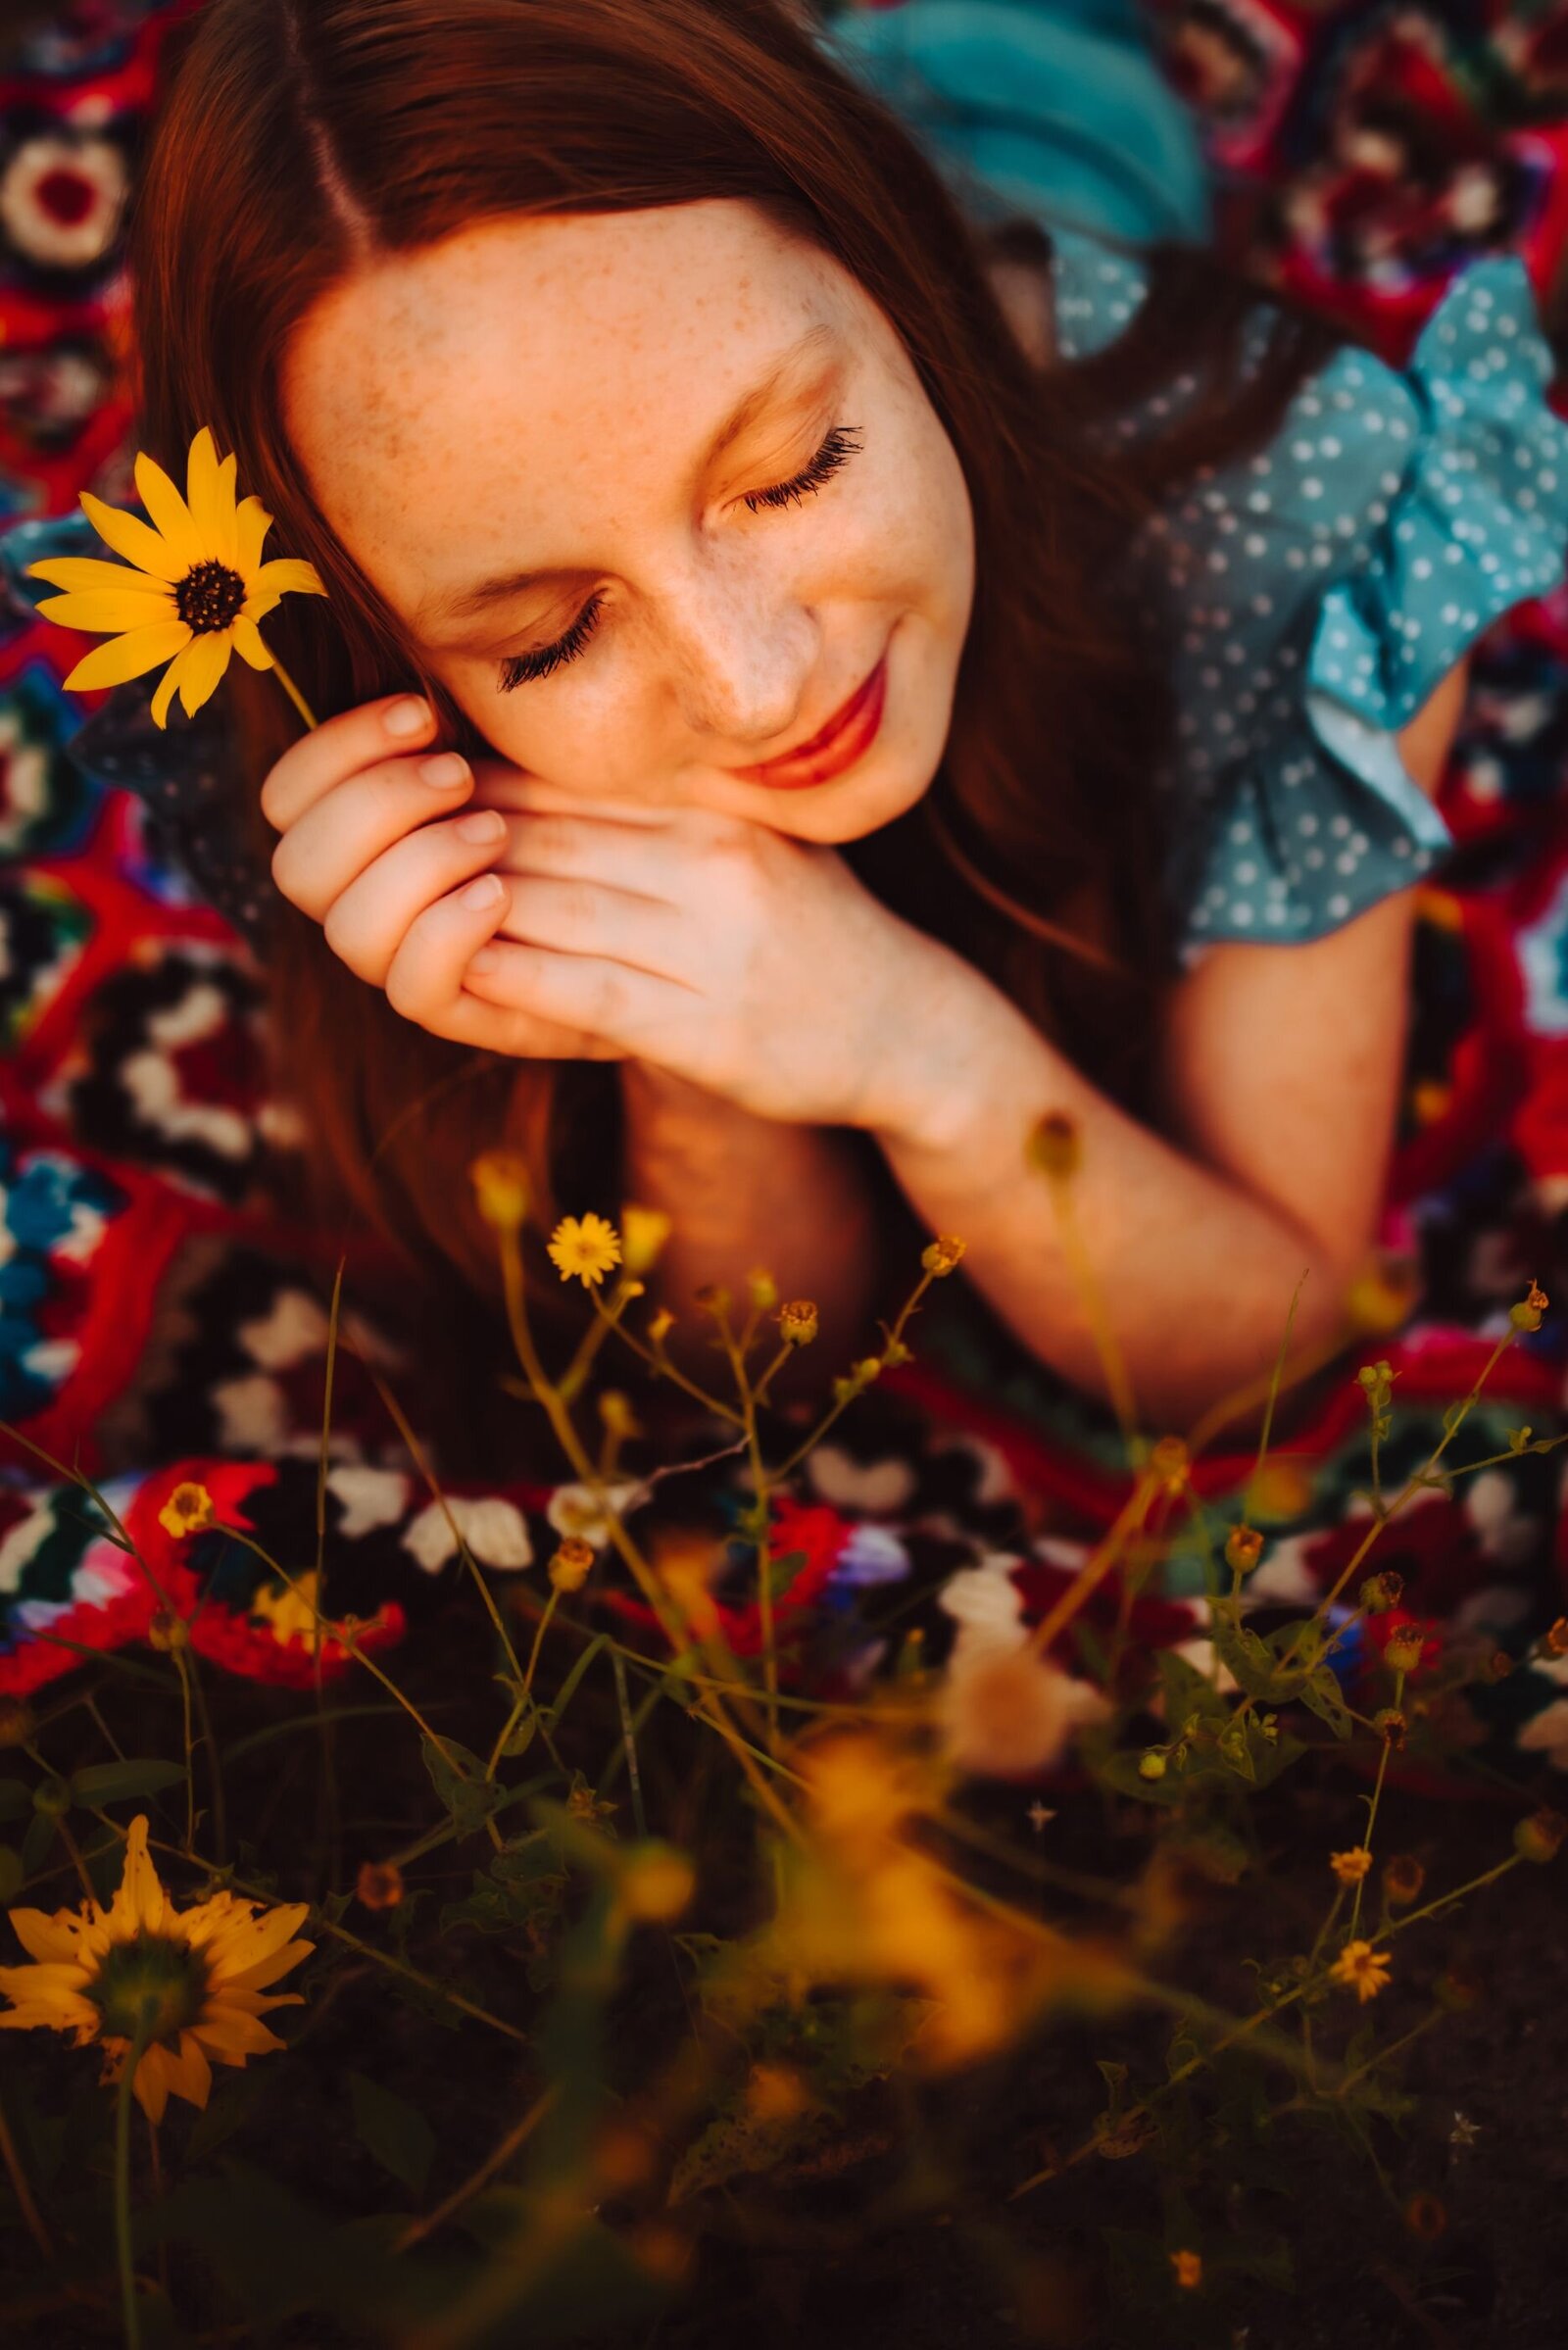 A young woman laying on a blanket in a field of yellow flowers. Her eyes are closed and her head is resting on her hands, in one hand she is holding a yellow flower. captured by Infinite Productions